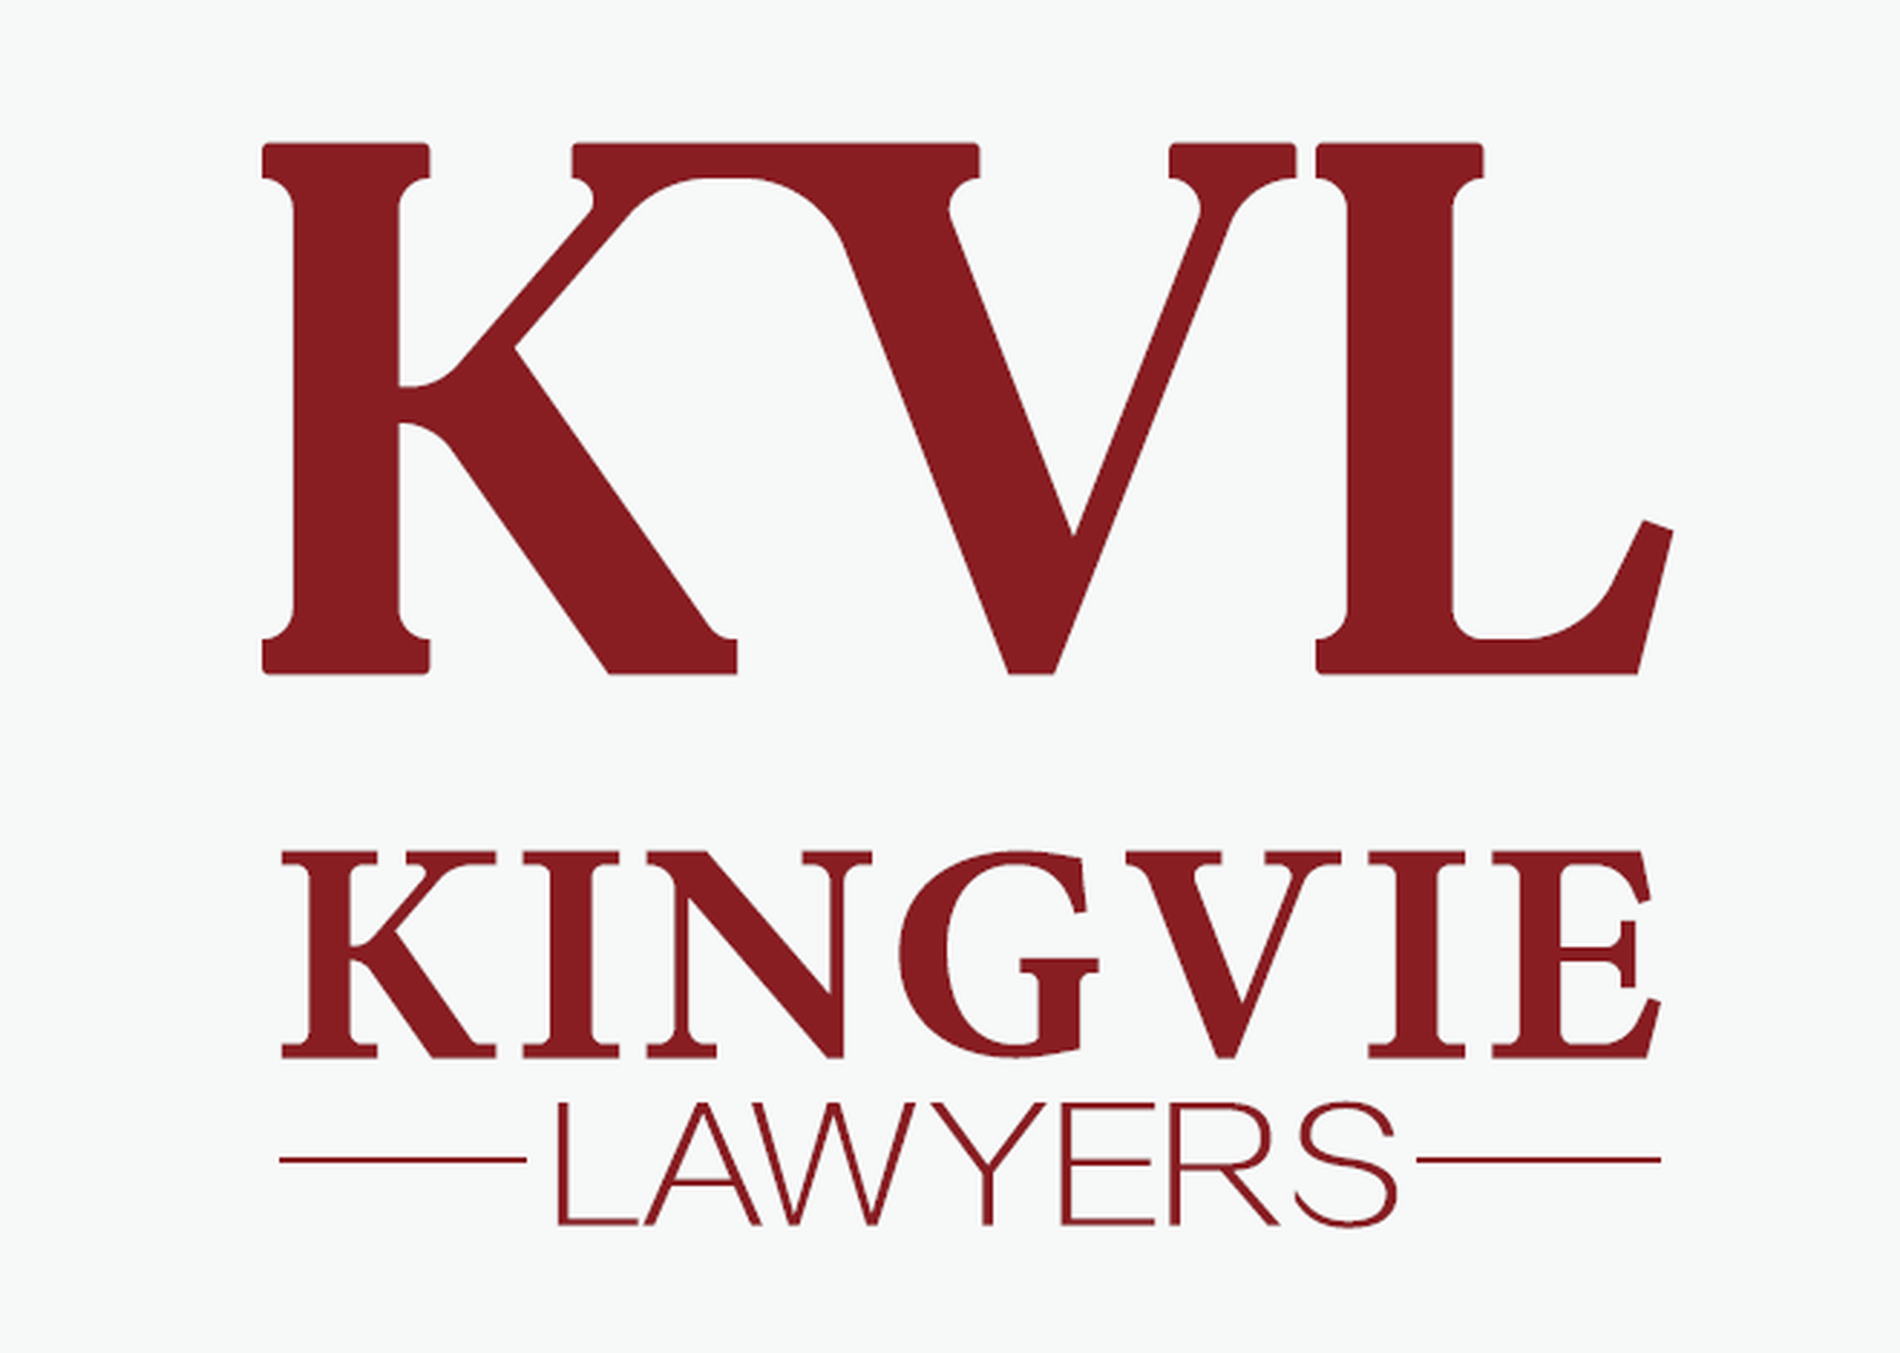 Kingvie Lawyers was founded in 2020. The Firm provides legal service across the P.R. China. Kingvie is a full-service firm, which qualified and competent to provide legal service in all areas of Chinese laws.  Nowadays, with the deepening of social division,Kingvie Lawyers is acting according to how things proceed accurately positioning the field of intellectual property and corporate, and striving to provide all clients with international-standard superior legal services.   Kingvie offers consultation services to companies at home and abroad as well as high net-worth individuals on all aspects of Chinese laws. KingVie boasts broad range of practice and is confident of providing comprehensive solutions for each specific client matter, based upon a thorough understanding of all relevant legal issues. KingVie spares no efforts to reach excellence and innovation and work relentlessly to deliver outstanding legal service. Its expertise, implementation, and training services, and ongoing support services deserve trustfrom its wide customer base around the world.  By analyzing the global intellectual property portfolio strategy of clients, KingVie creatively moves forward the node of relevant legal services, and goes all out to investigate and correct possible hidden risks by providing high-quality legal counsel services for enterprises, so as to  revolutionize the legal services space and escort the development of enterprises.  KingVie is committed to providing outstanding client service and excelling in the practice of law. The partners of the firm are easily accessible, and actively engage in every stage of the transaction. It remains focused on consistentlyclients and their needs, actively listening to their suggestions and implementing many of their great ideas into the bespoken legal services.  KingVie also prides itself in our ongoing customer care. It sets out to provide prompt, favorable, friendly and knowledgeable support to help resolve any questions or issues that arise.  Above all, KingVie has a cost-competitive billing structure that offers various options like a upfront, lump-sum, and hourly basis to meet various needs of clients 